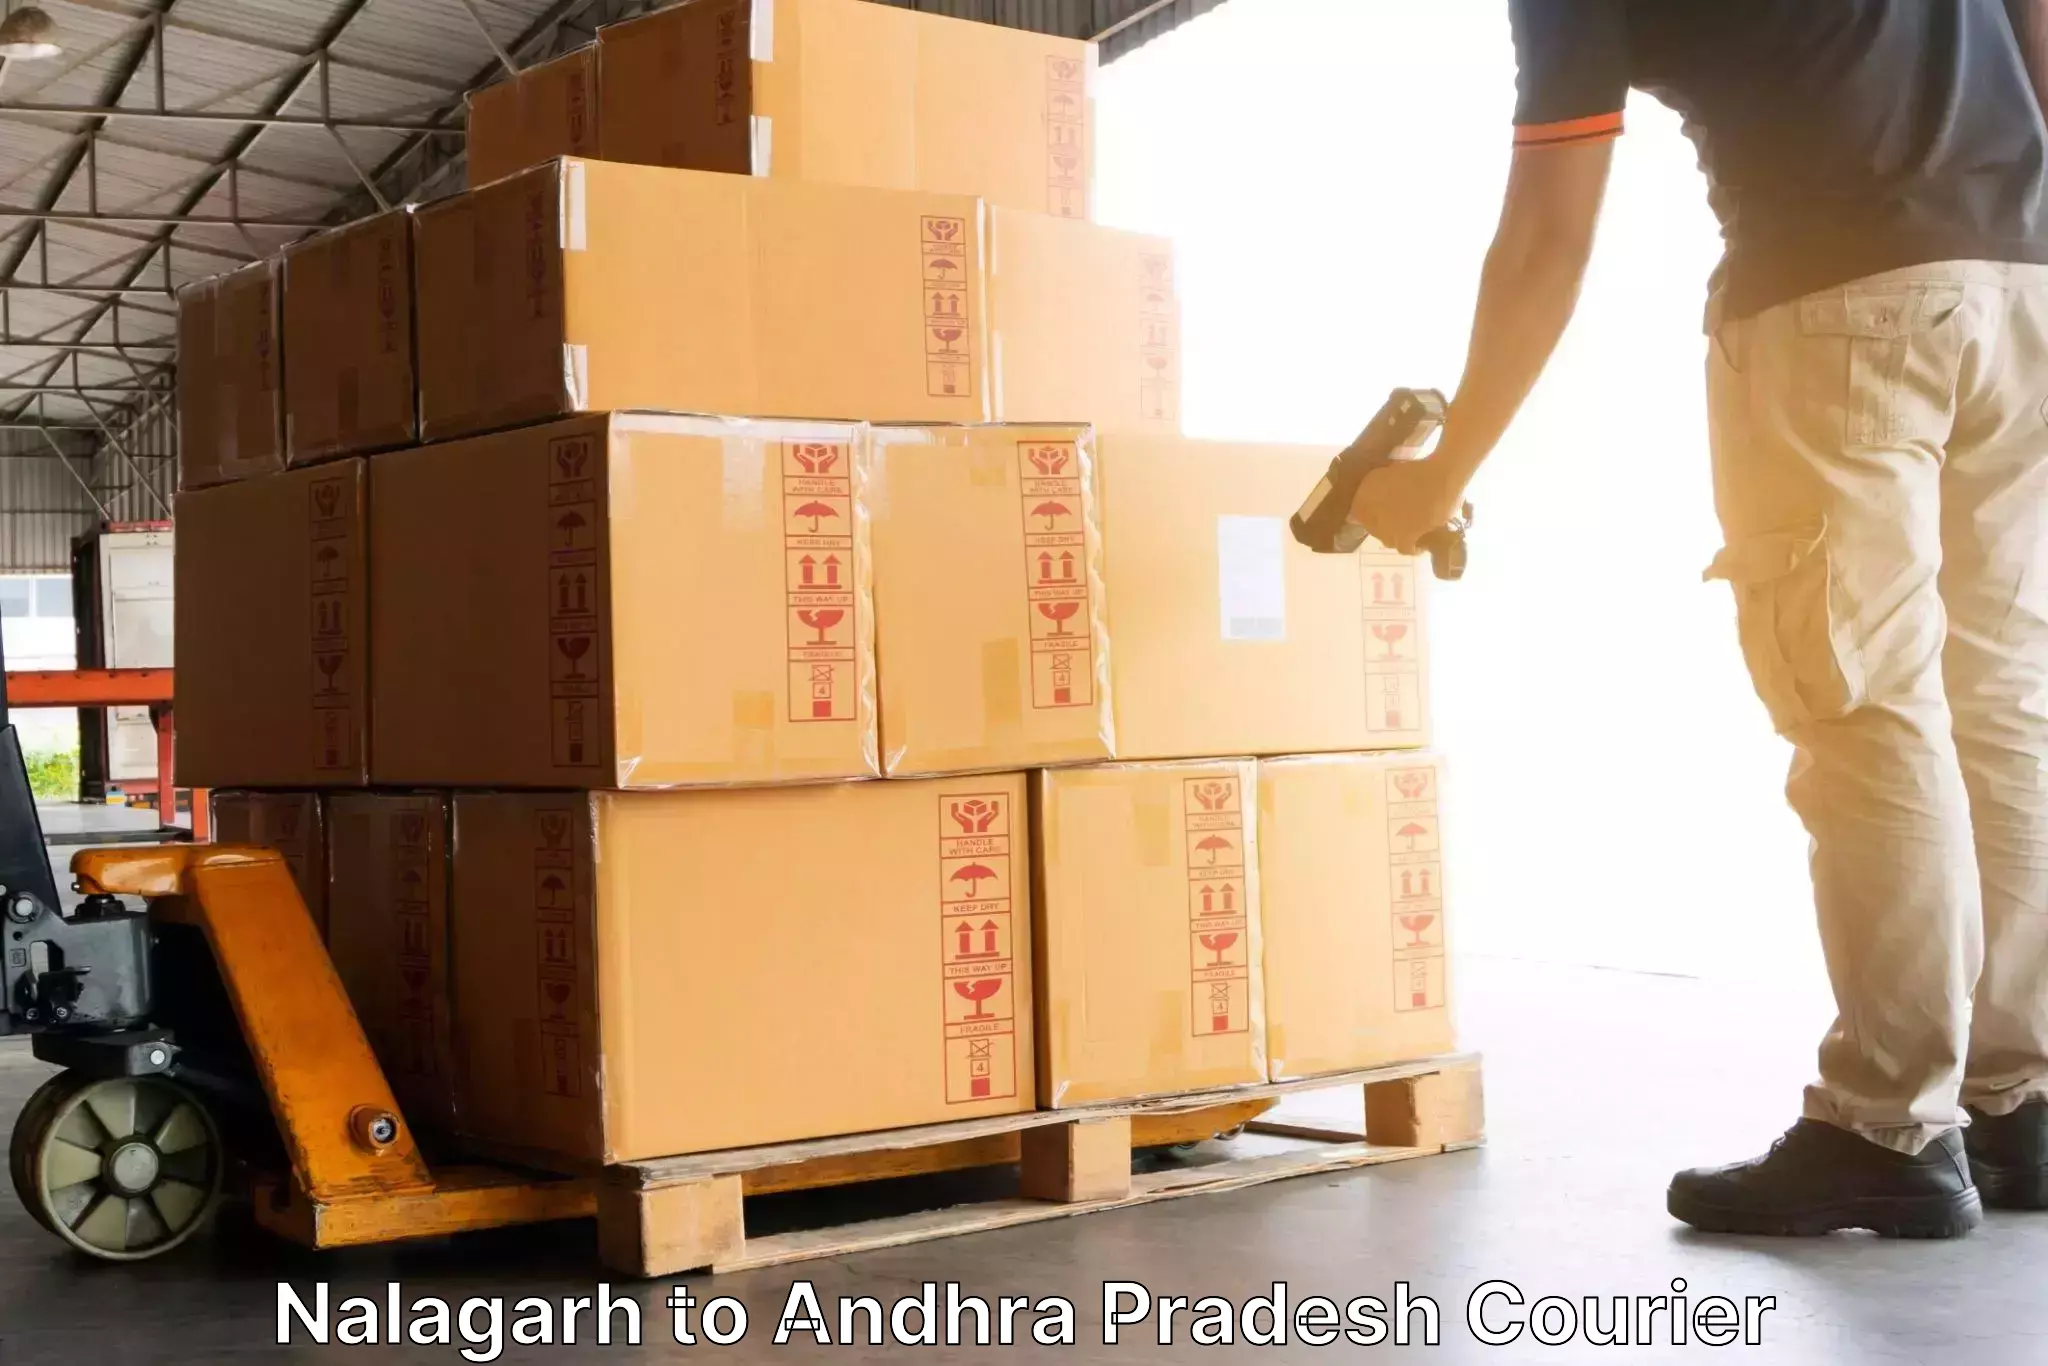 Expedited parcel delivery in Nalagarh to Samarlakota